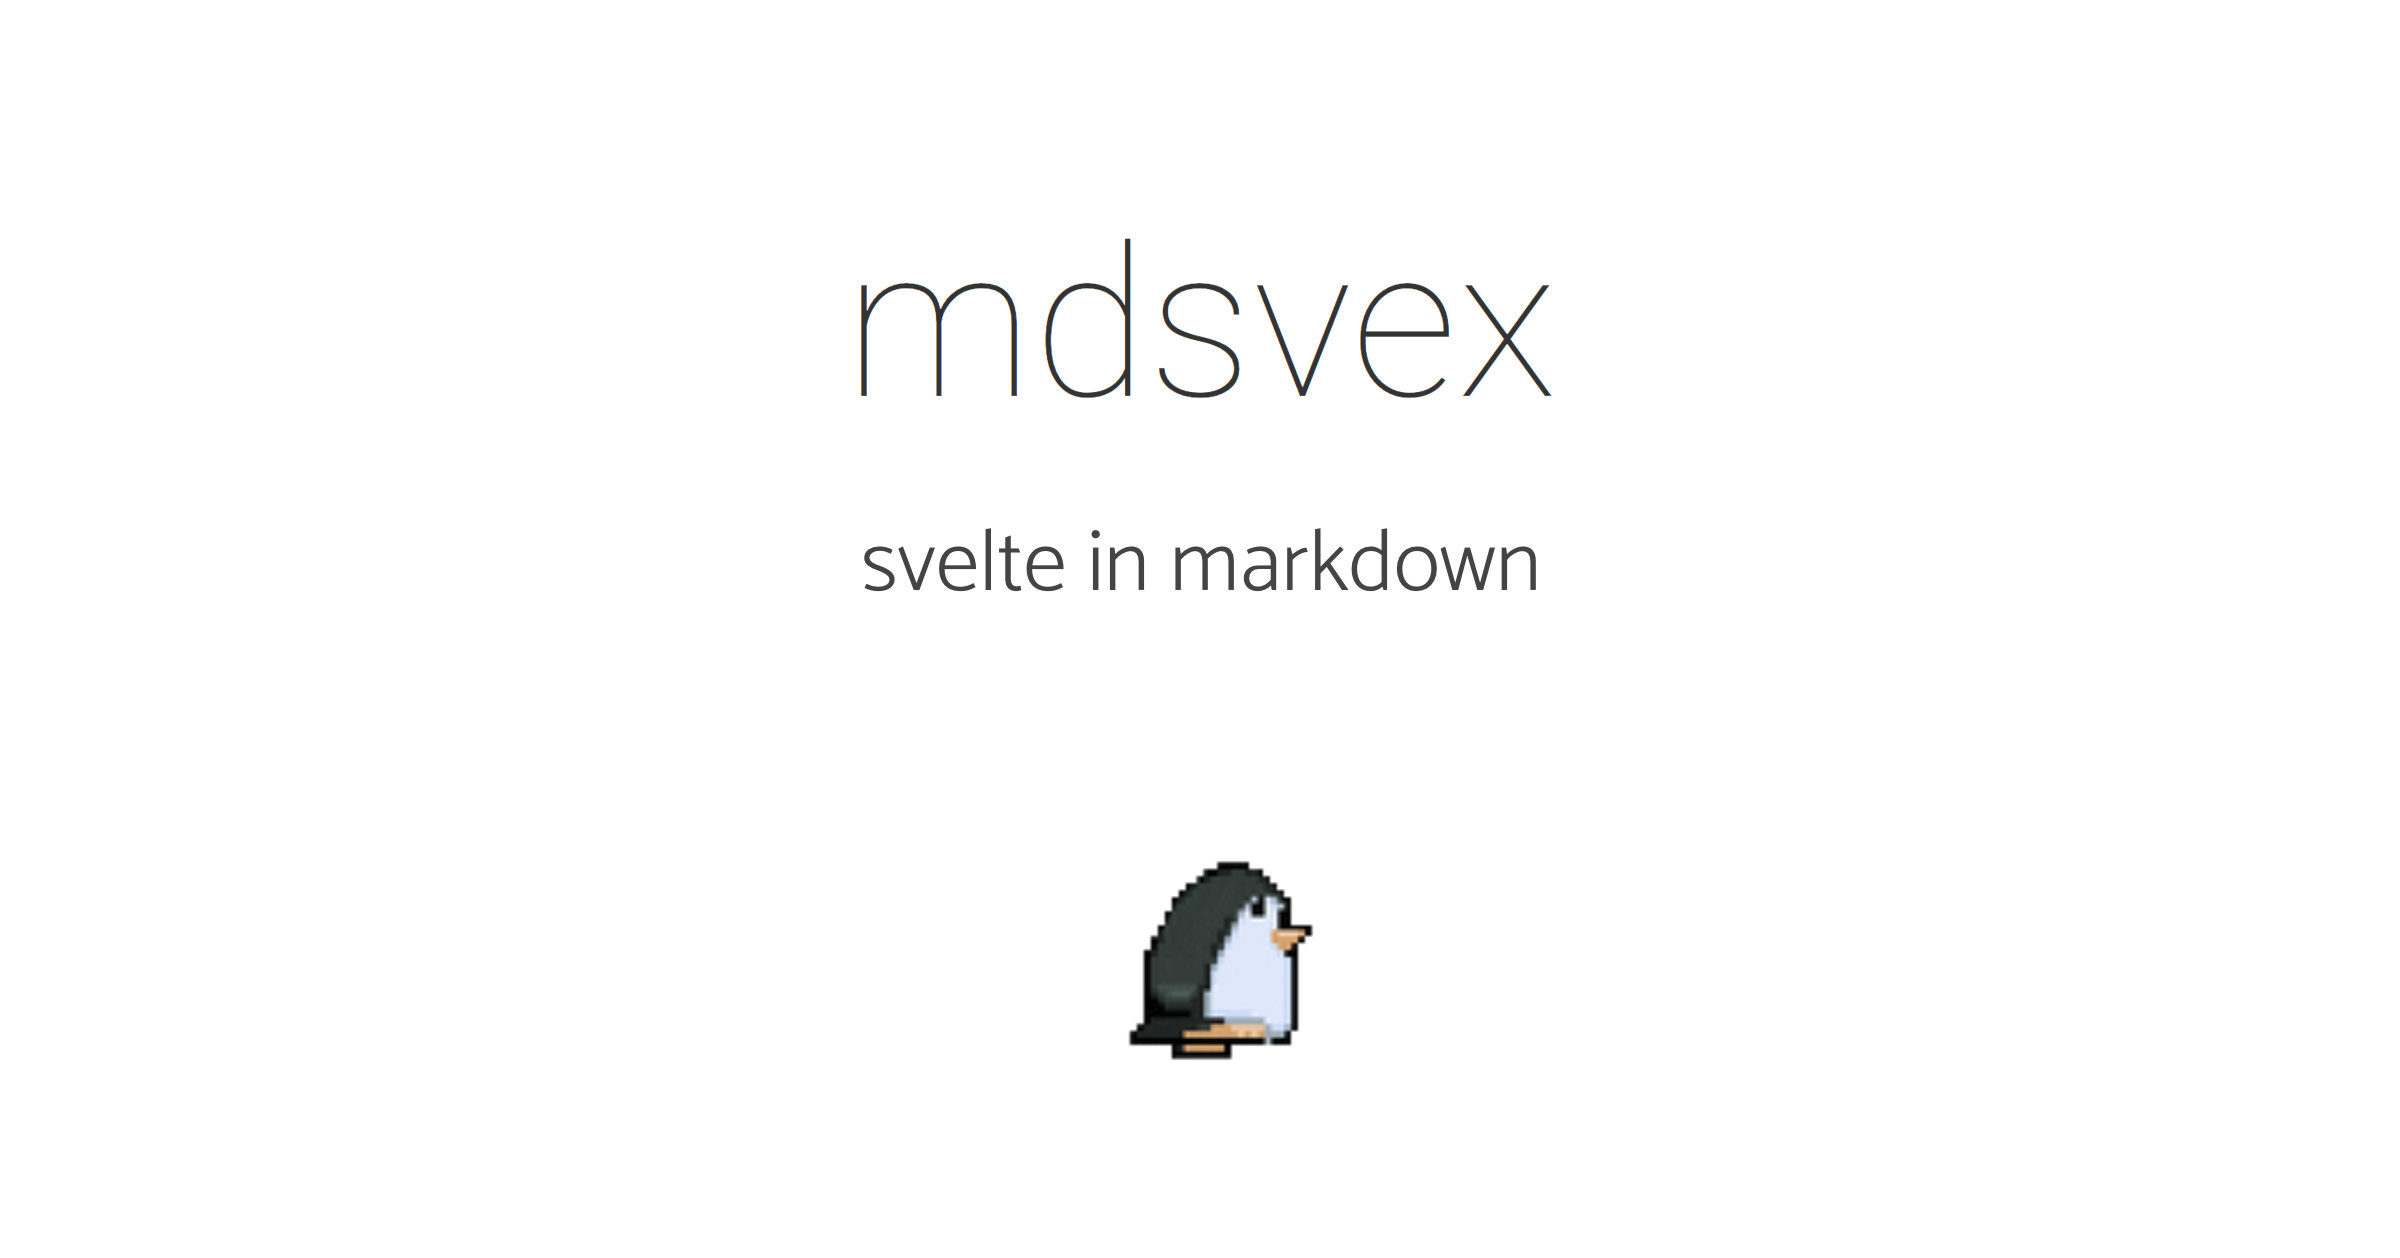 Embed media components using MDX and SvelteKit